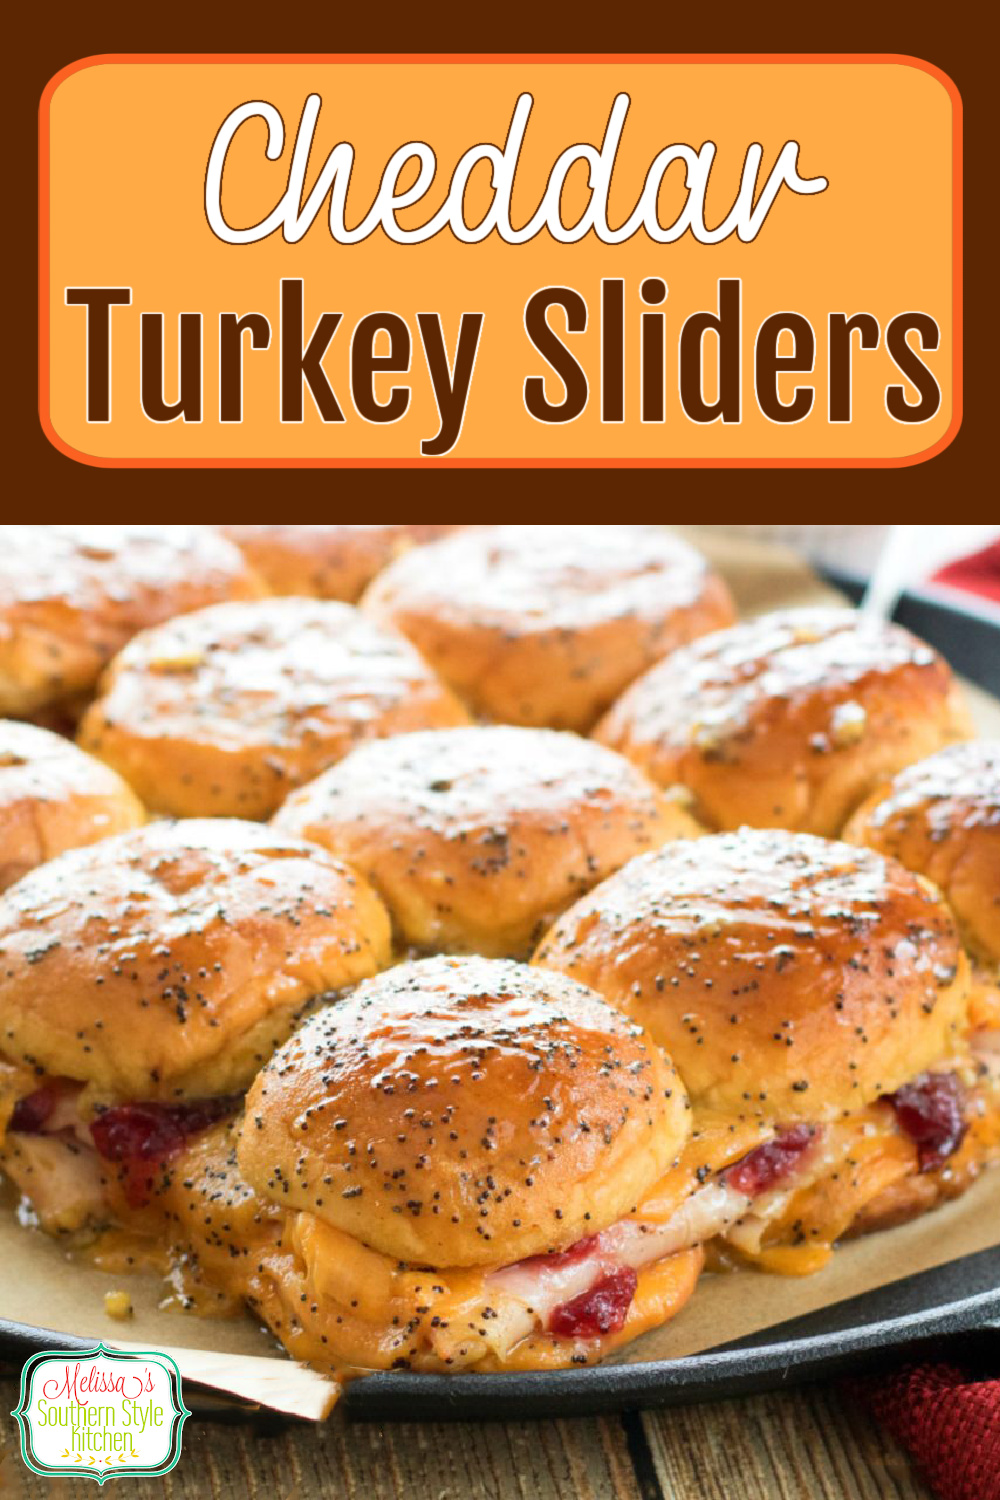 Insanely delicious Poppy Seed Cheddar Turkey Sliders can be served as an appetizer or casual meal #turkeysliders #cranberries #turkeyrecipes #dinner #dinnerideas #sliders #turkey #turkeysandwiches #leftoverturkeyrecipes #southernfood #southernrecipes #fallbaking #thanksgiving #cranberrysauce #recipes via @melissasssk